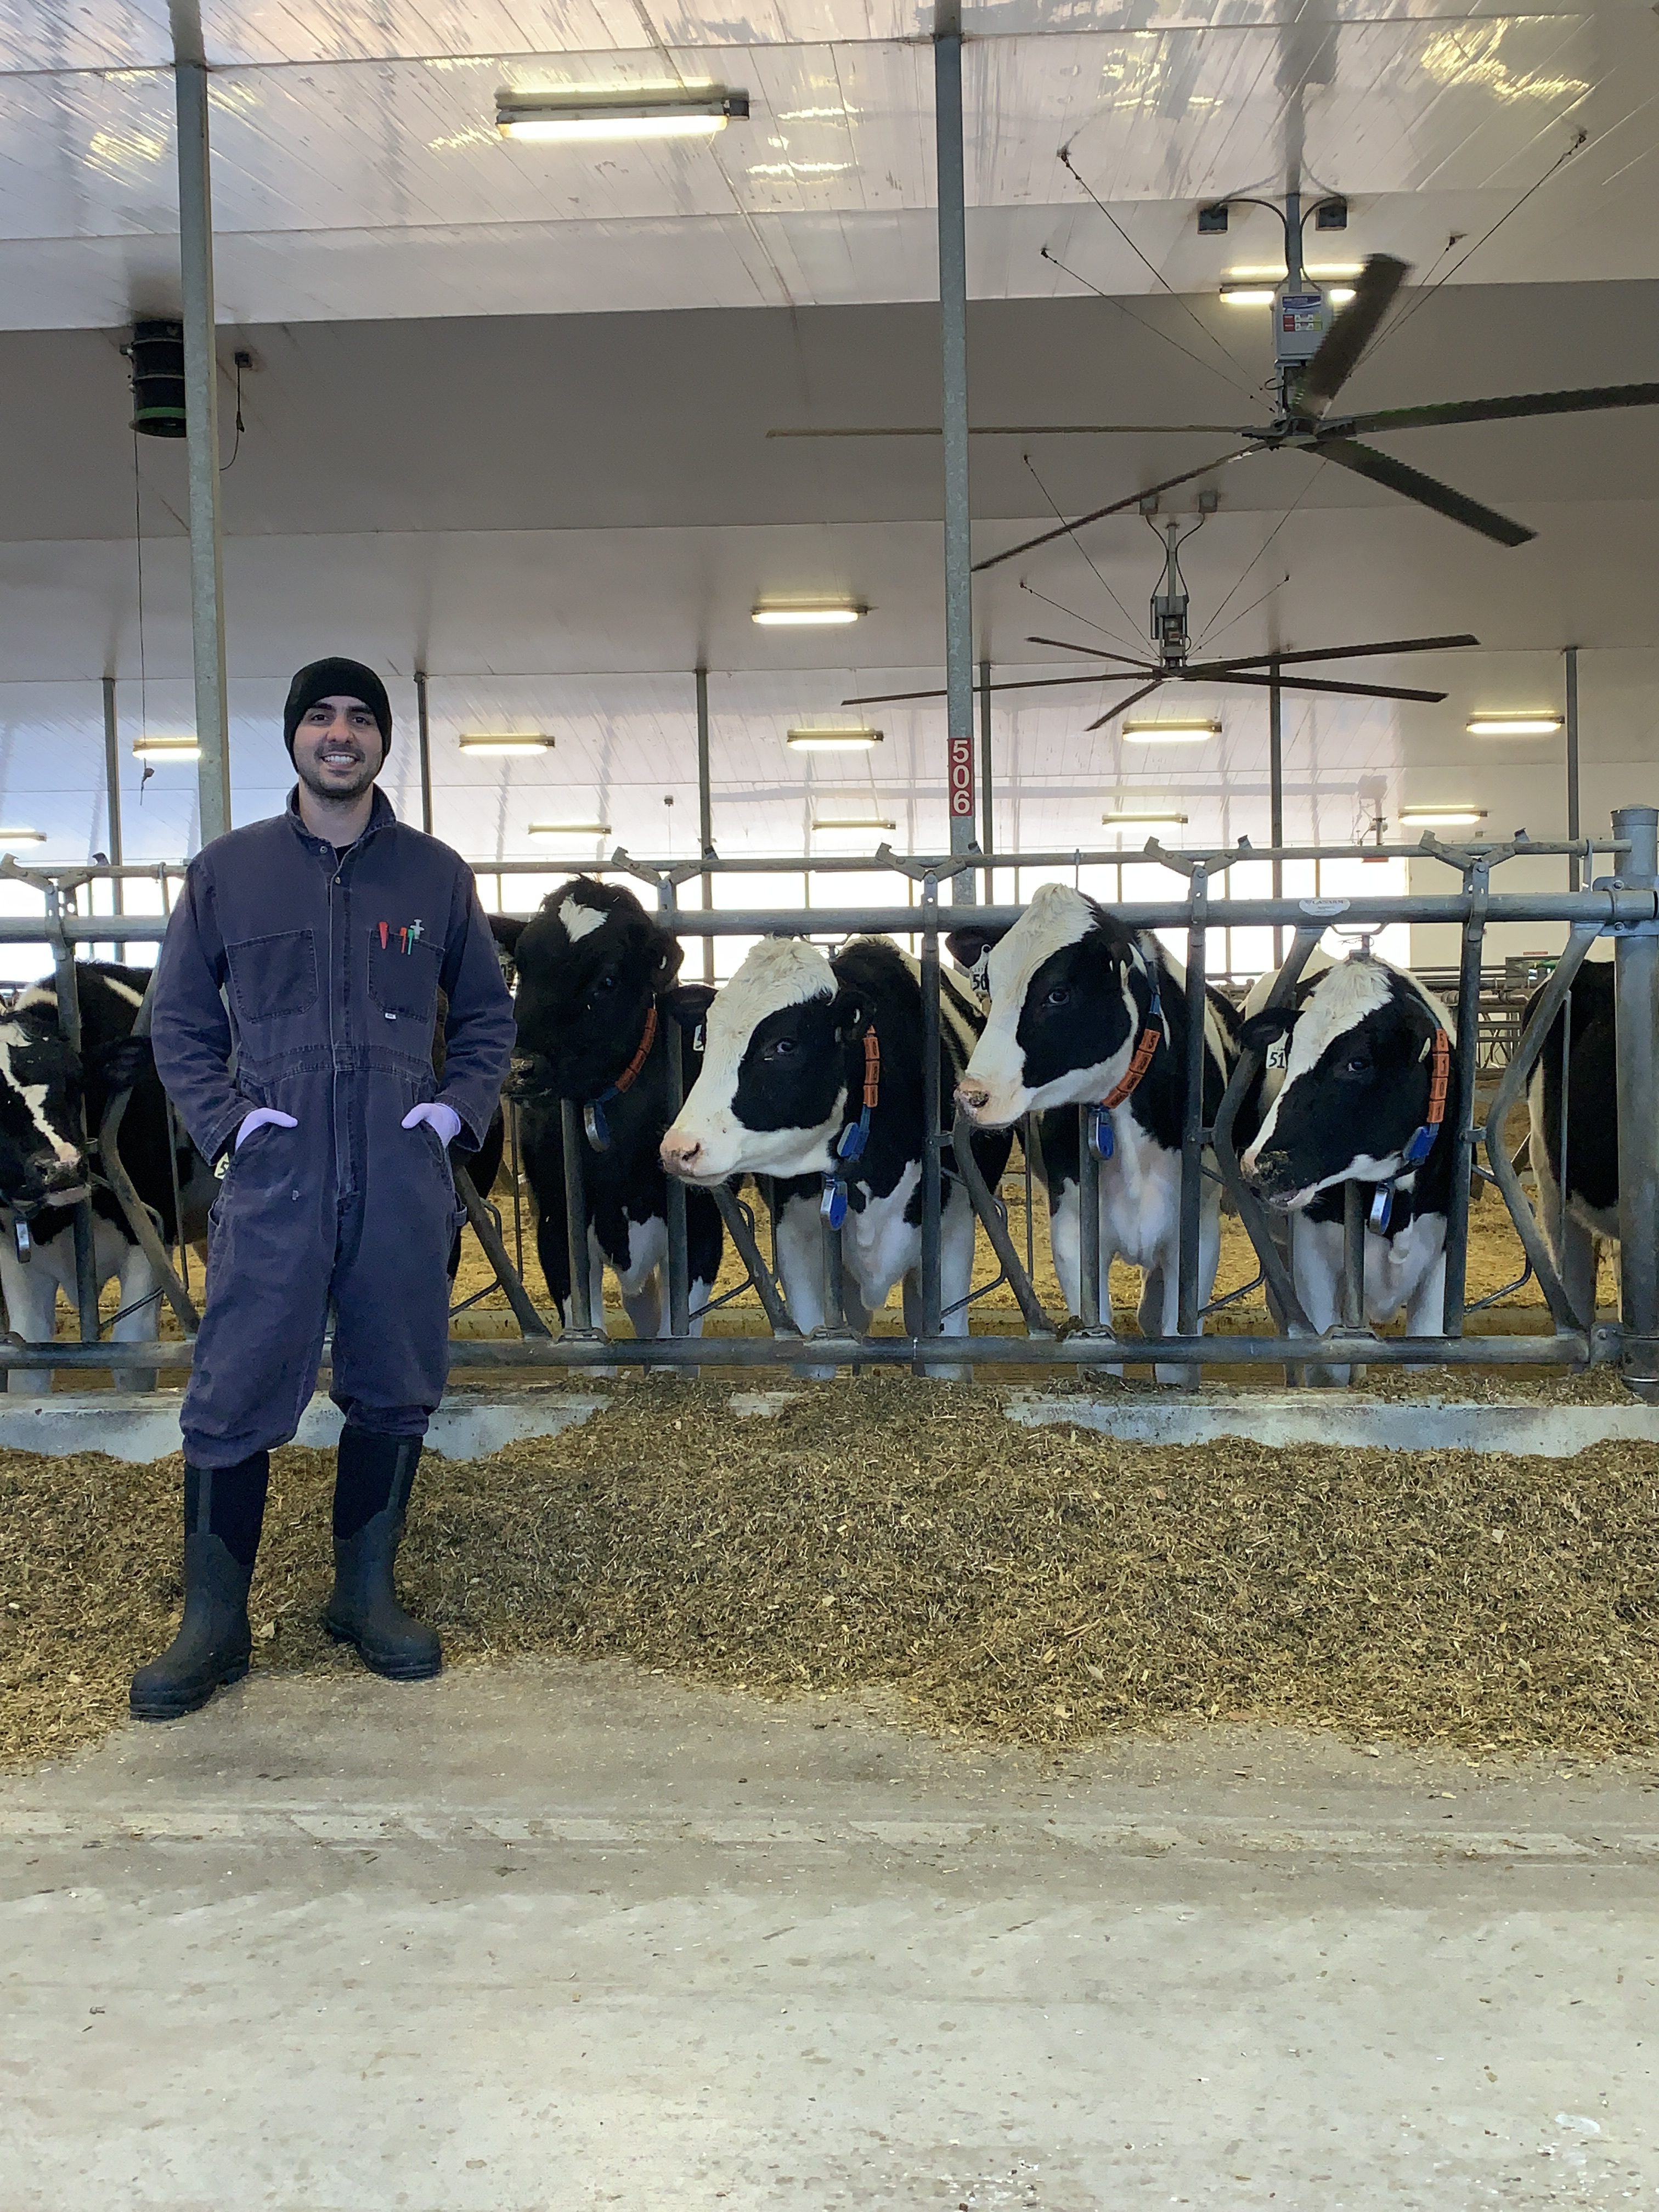 A man standing in front of cows in stalls 